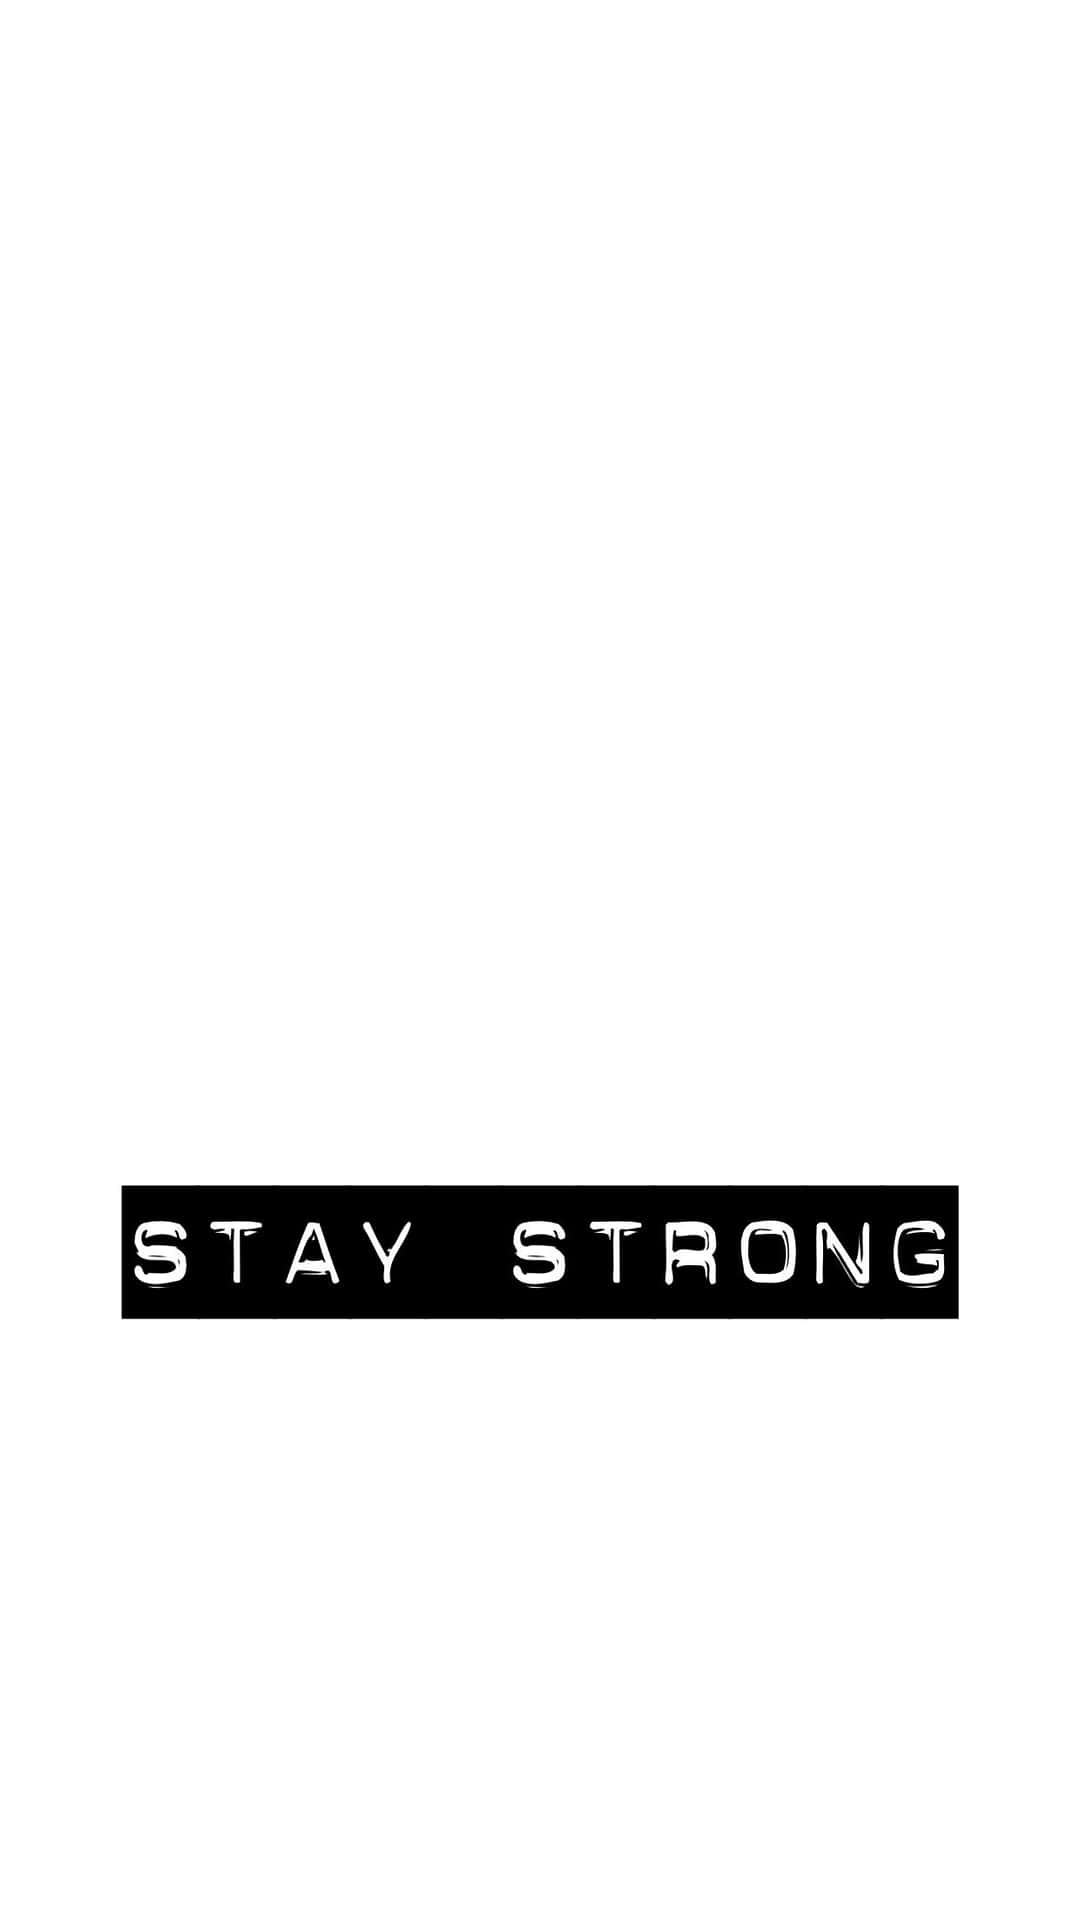 Stay Strong Logo Wallpaper